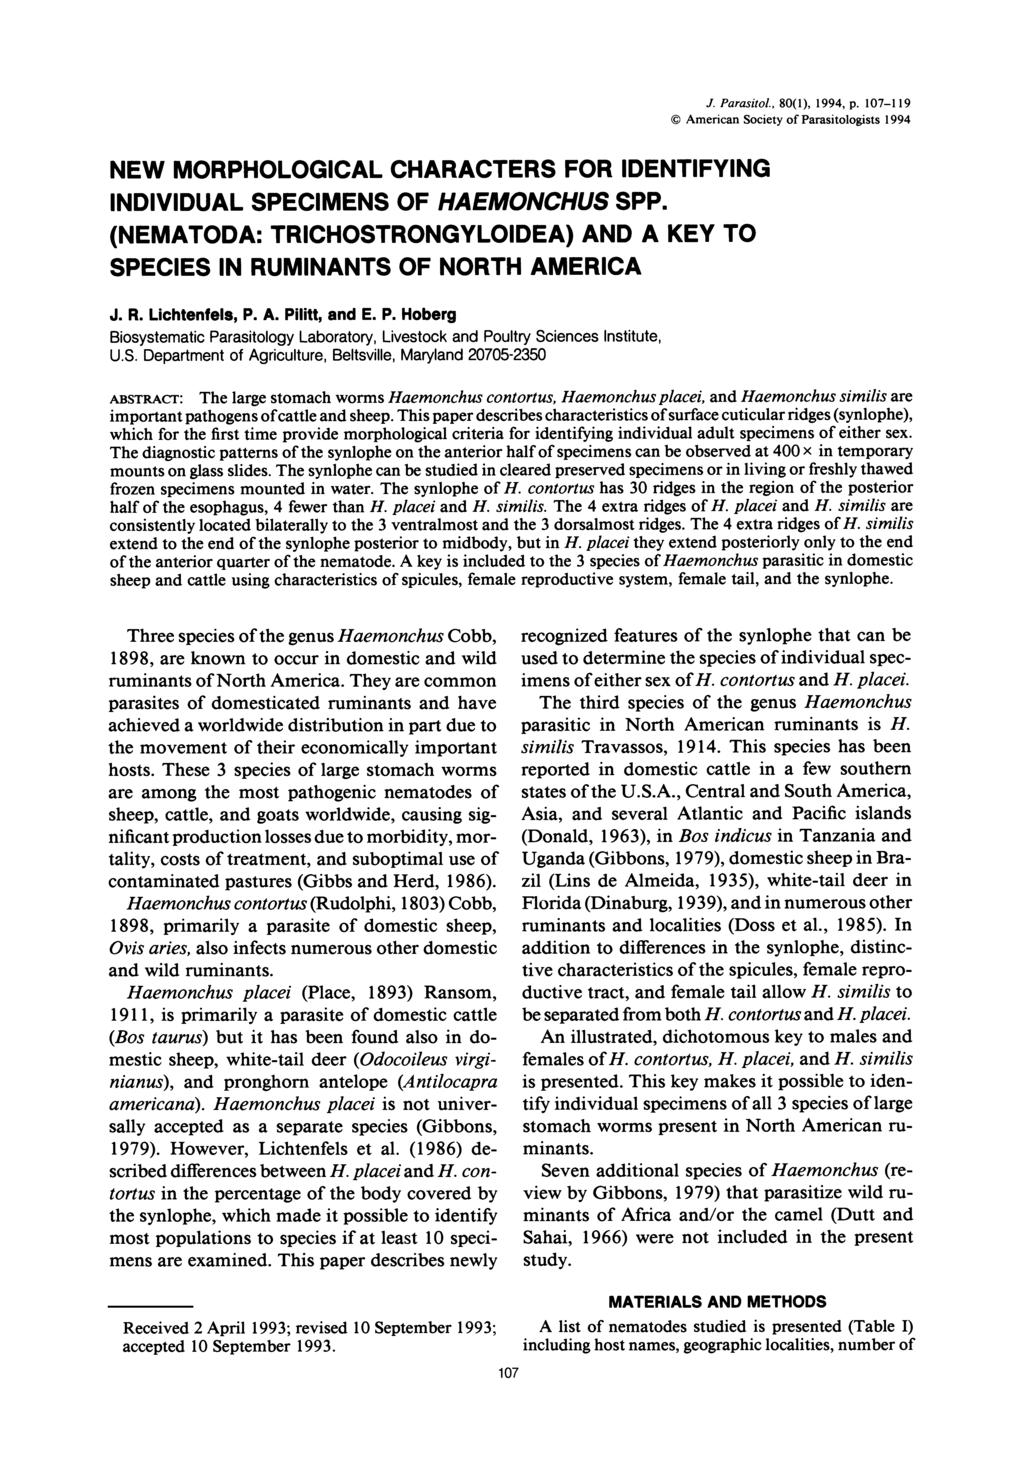 J. Parasitol., 80(1), 1994, p. 107-119? American Society of Parasitologists 1994 NEW MORPHOLOGCAL CHARACTERS FOR DENTFYNG NDVDUAL SPECMENS OF HAEMONCHUS SPP.